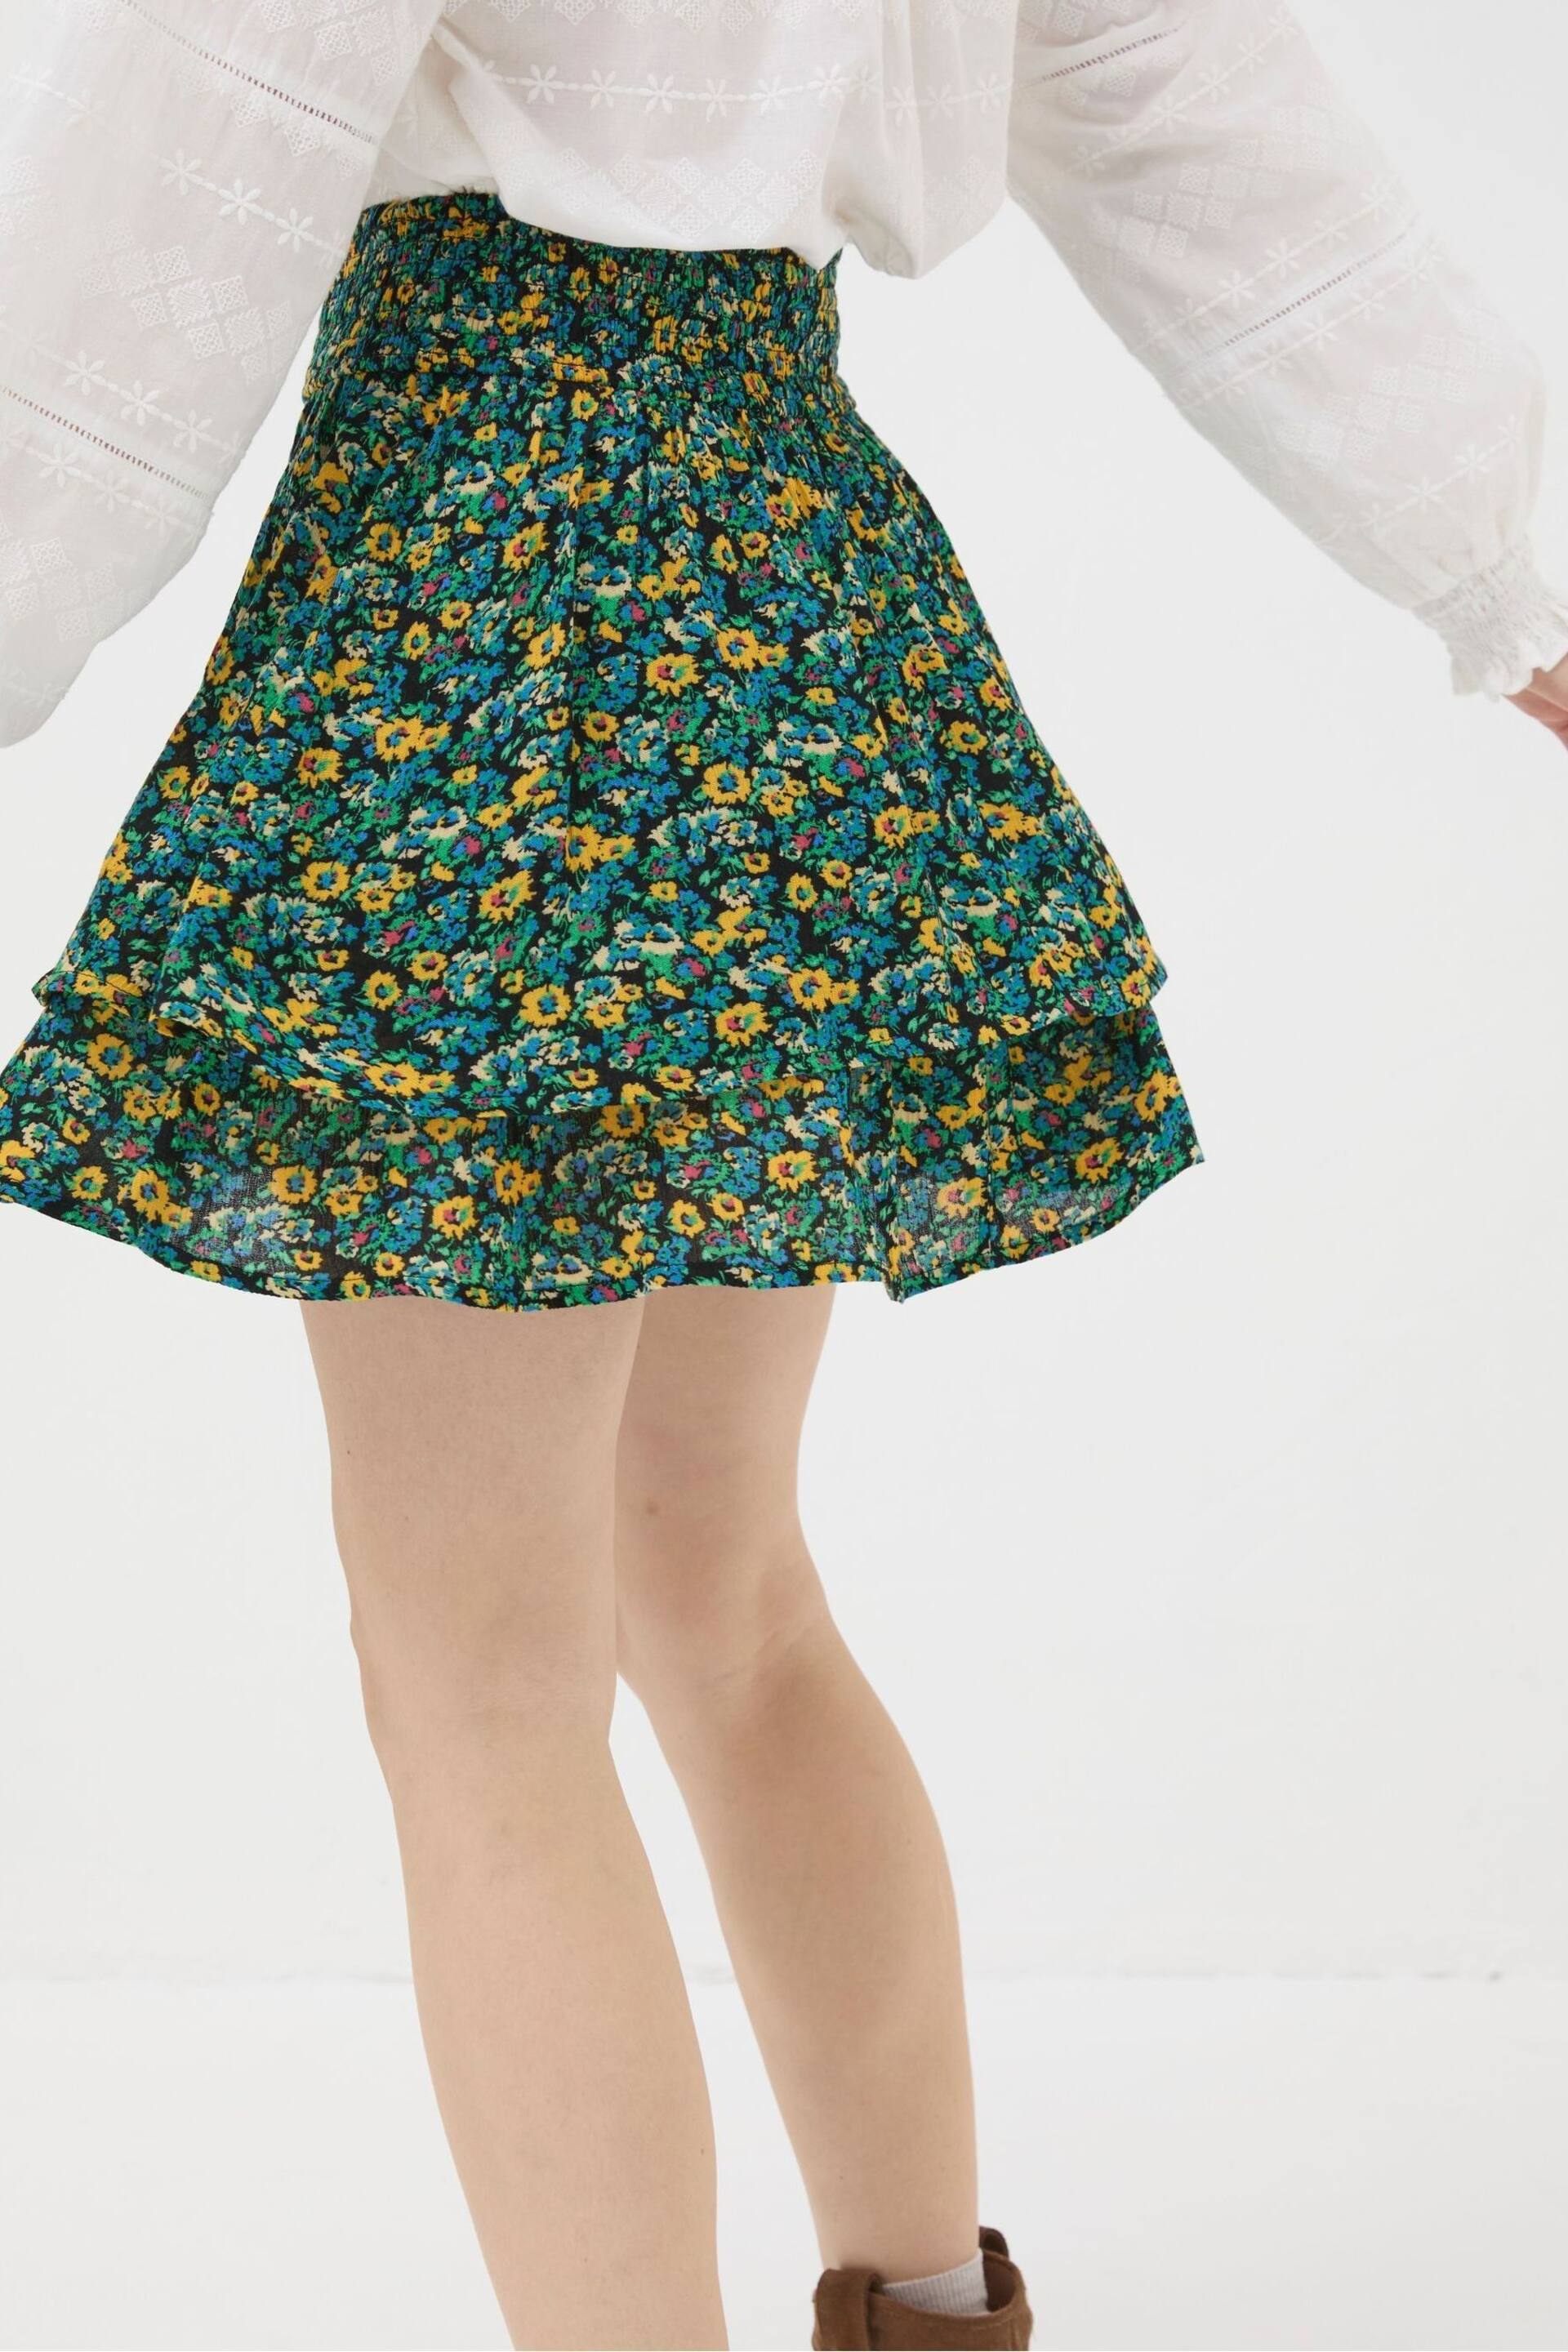 FatFace Green Ali Spring Floral Skirt - Image 3 of 5